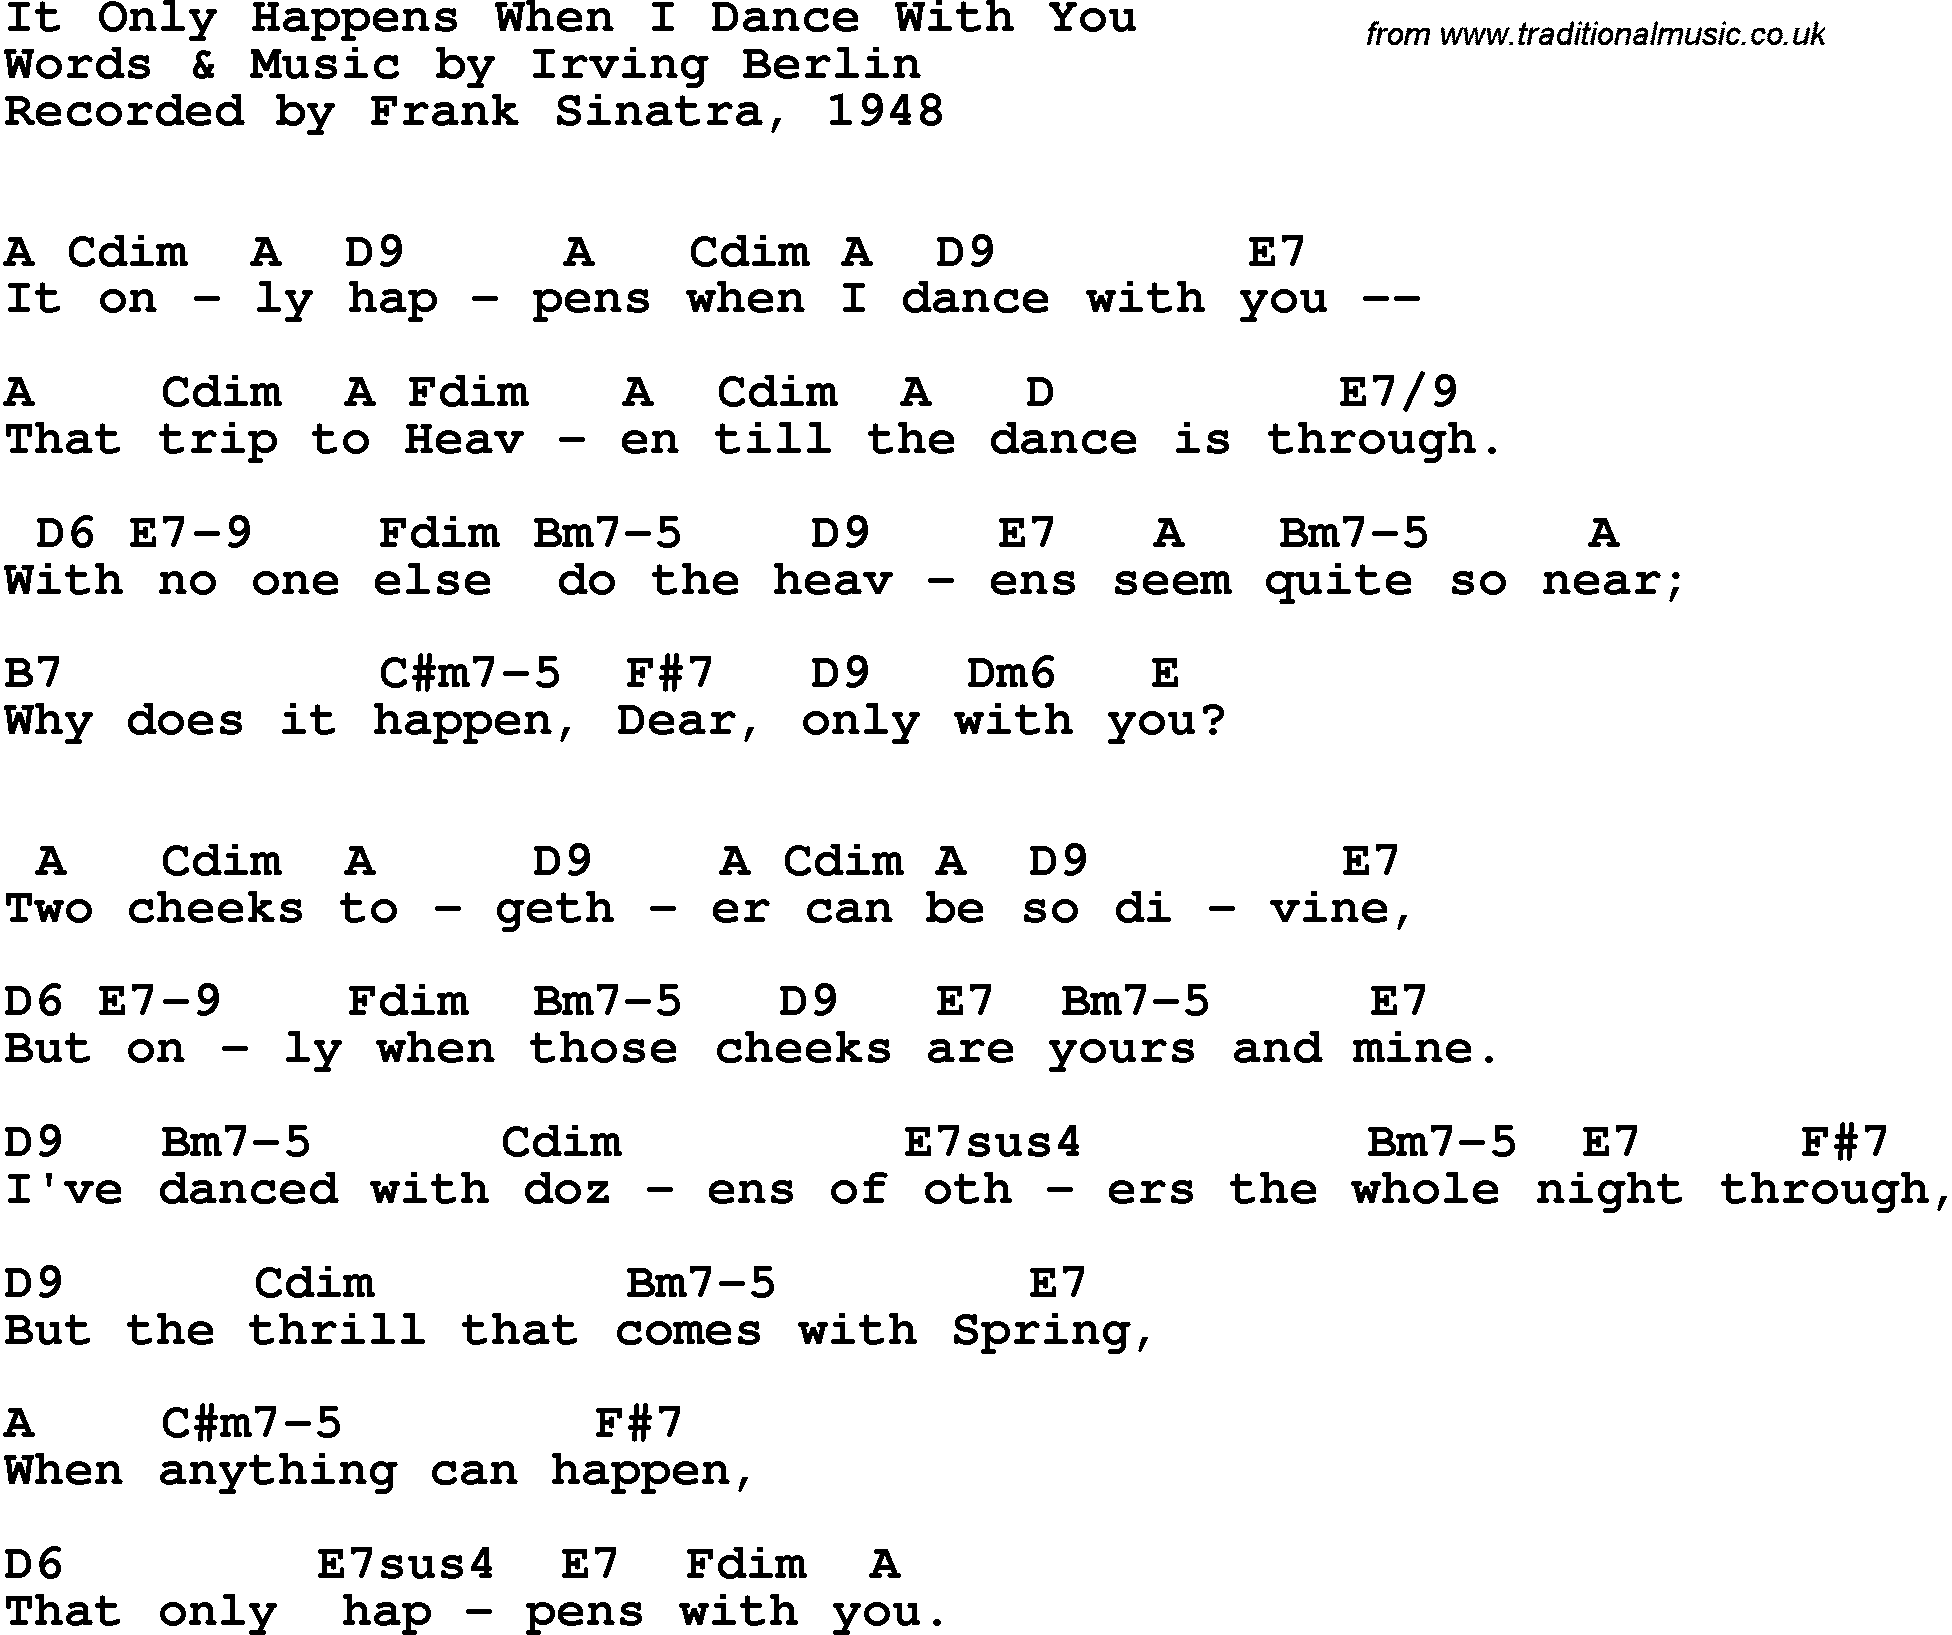 Song Lyrics with guitar chords for It Only Happens When I Dance With You - Frank Sinatra, 1948